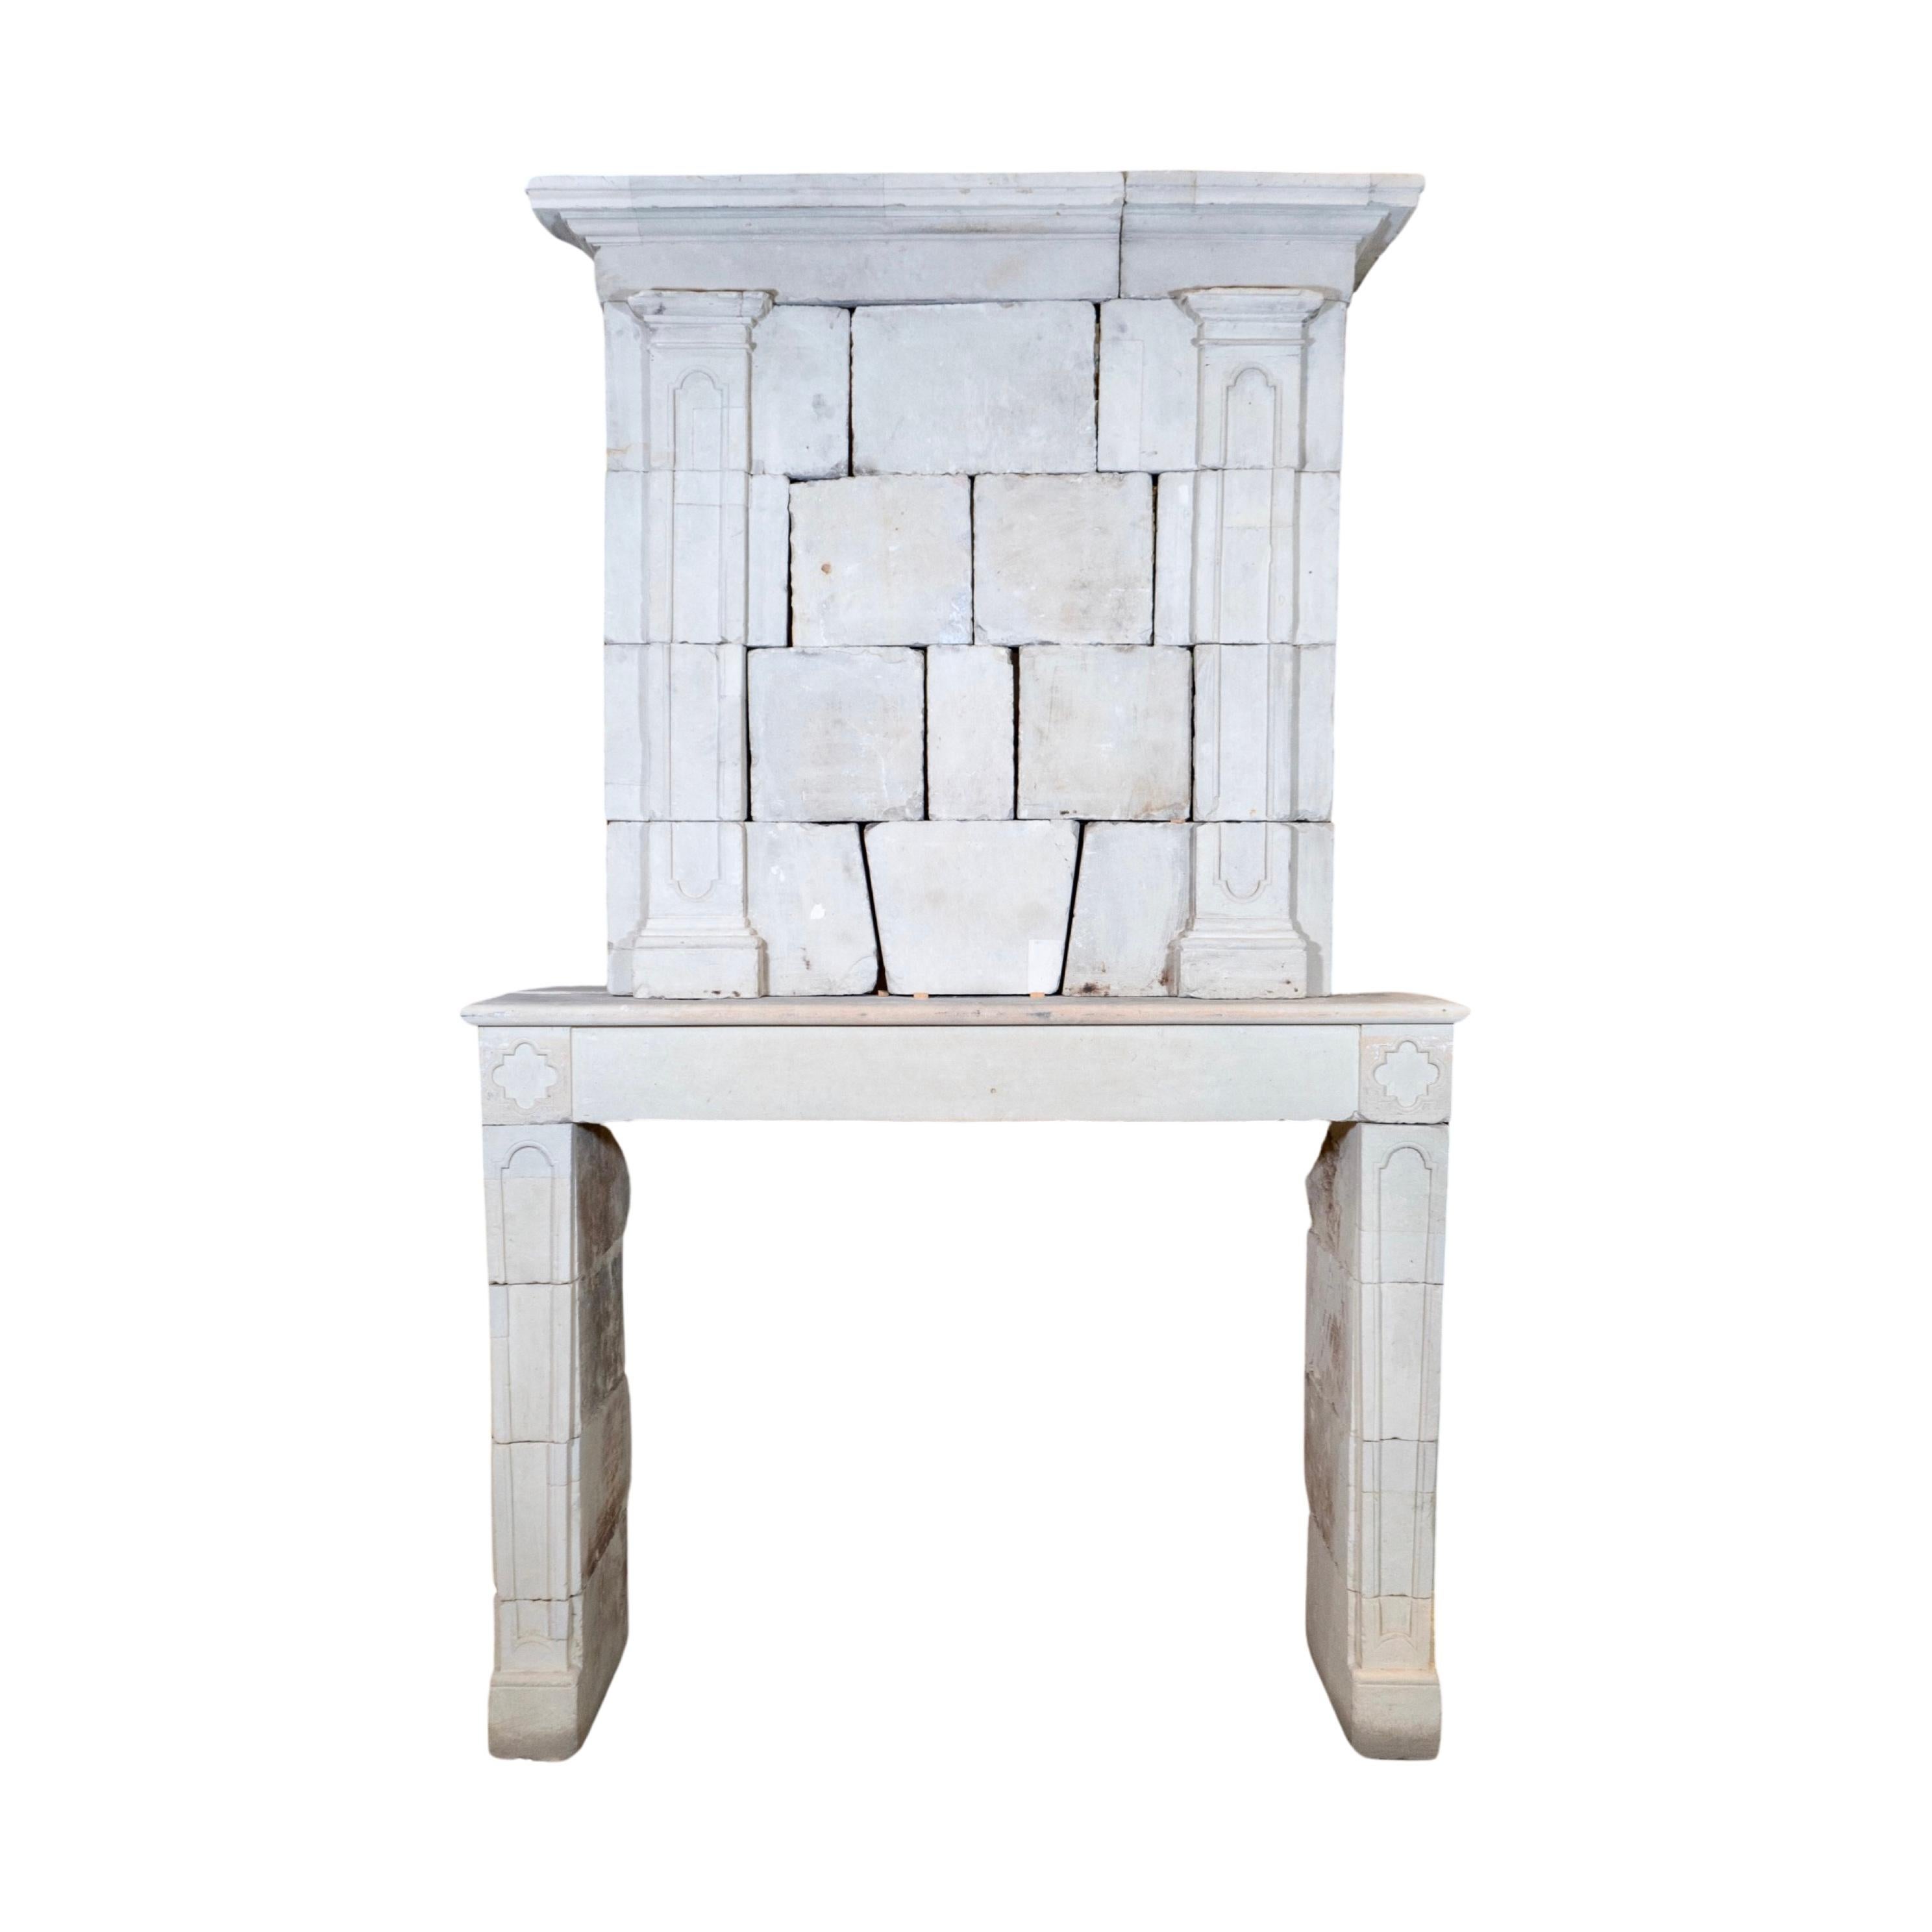 This antique French Limestone Mantel is a masterpiece from the 1720s, featuring intricate carvings and a trumeau. Handcrafted from authentic limestone, this fireplace mantel adds elegance and sophistication to any room. From France, it brings a